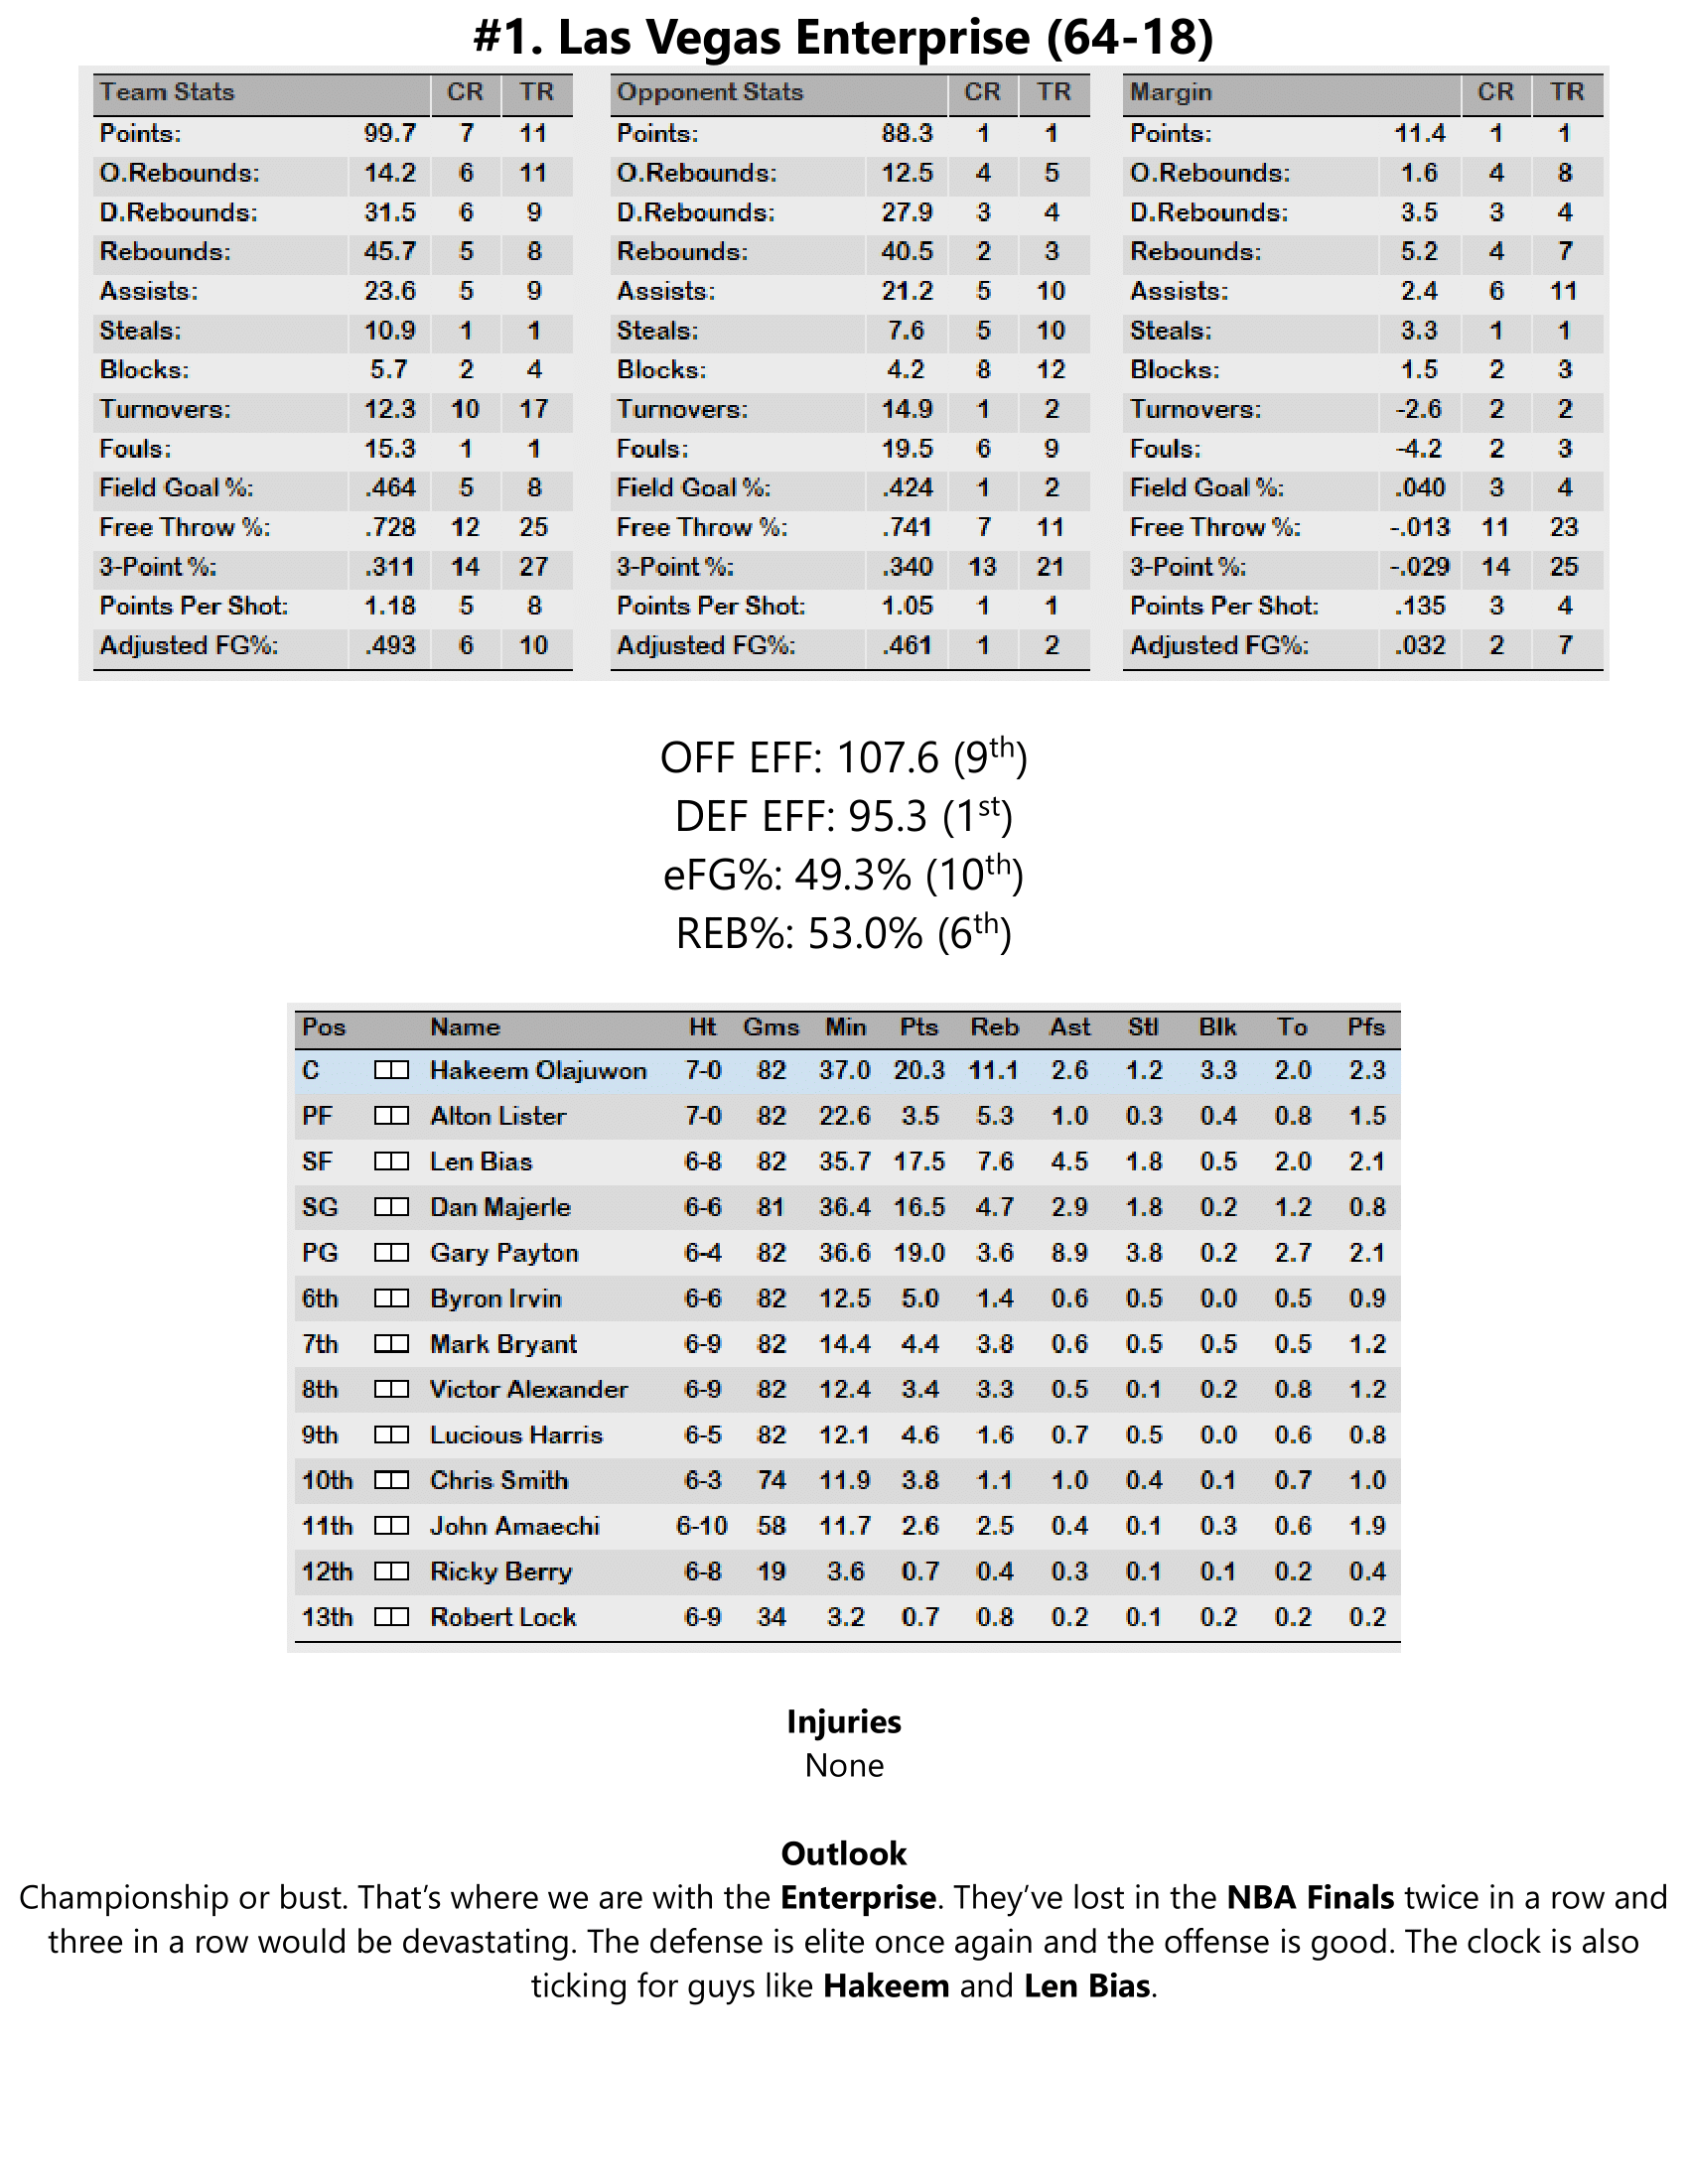 95-96-Part-3-Playoff-Preview-02.png